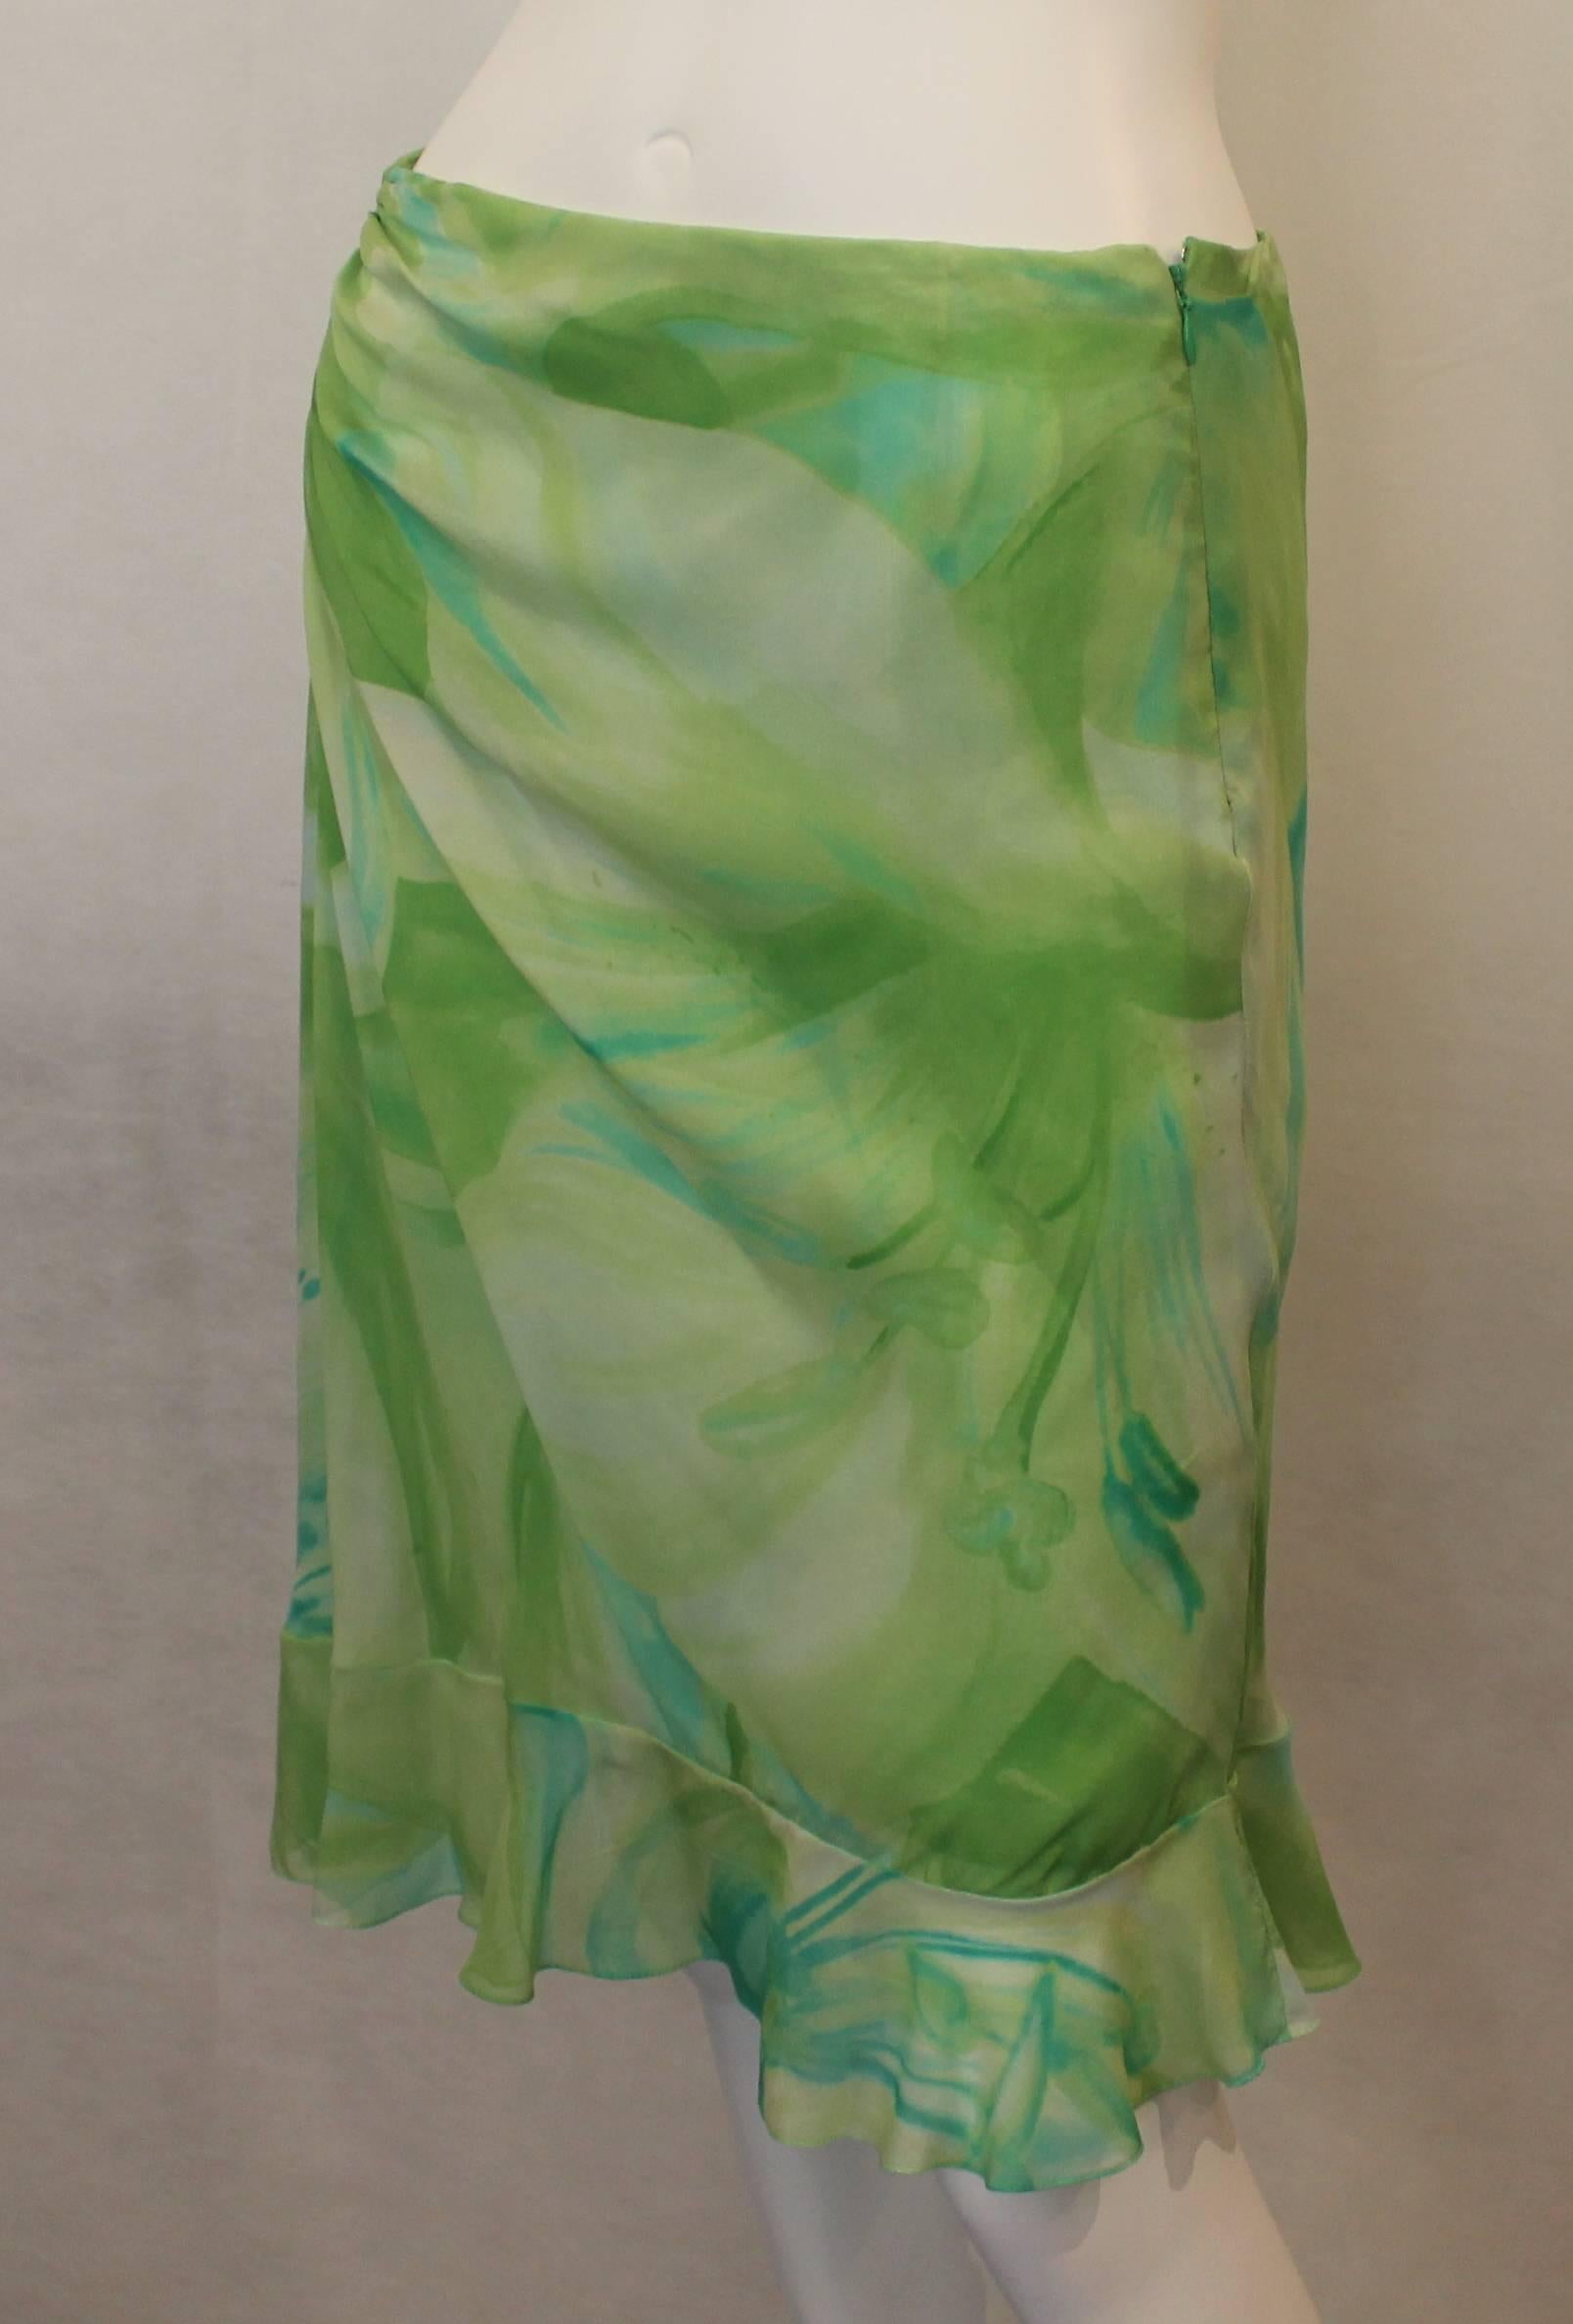 Oscar de la Renta Green Watercolor-Like Floral Printed Silk Chiffon Skirt - 6. This skirt has multiple shades of green on it and features a watercolor-like floral print. There is a side zipper and has some ruching on the top/side and a bottom